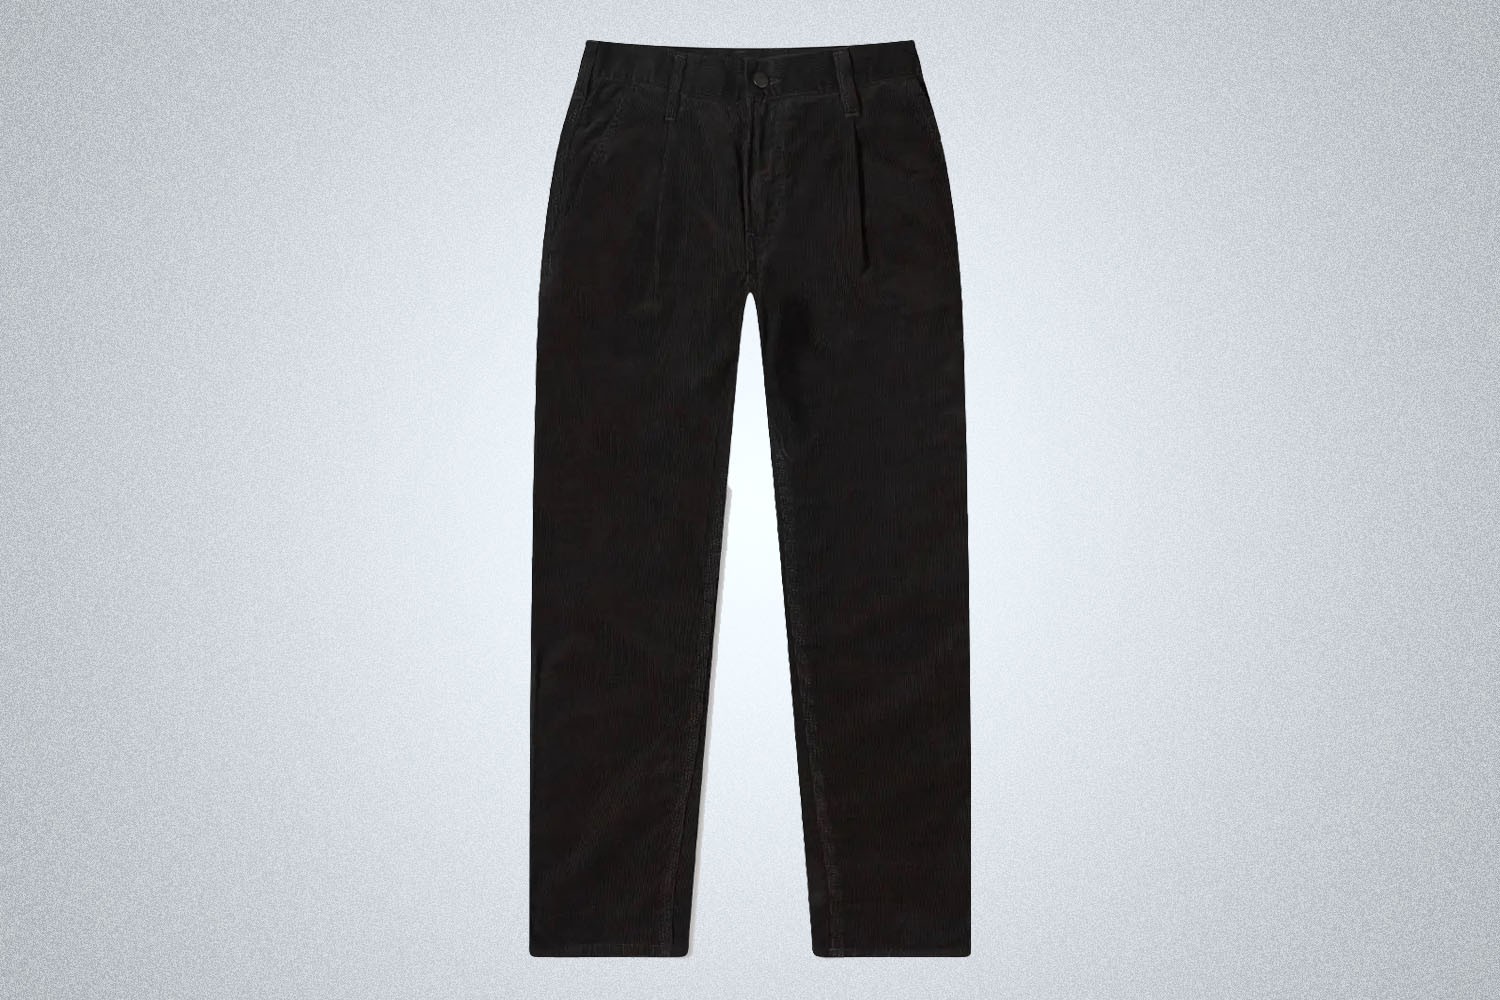 a pair of black Carhartt WIP corduroy pants on a grey background